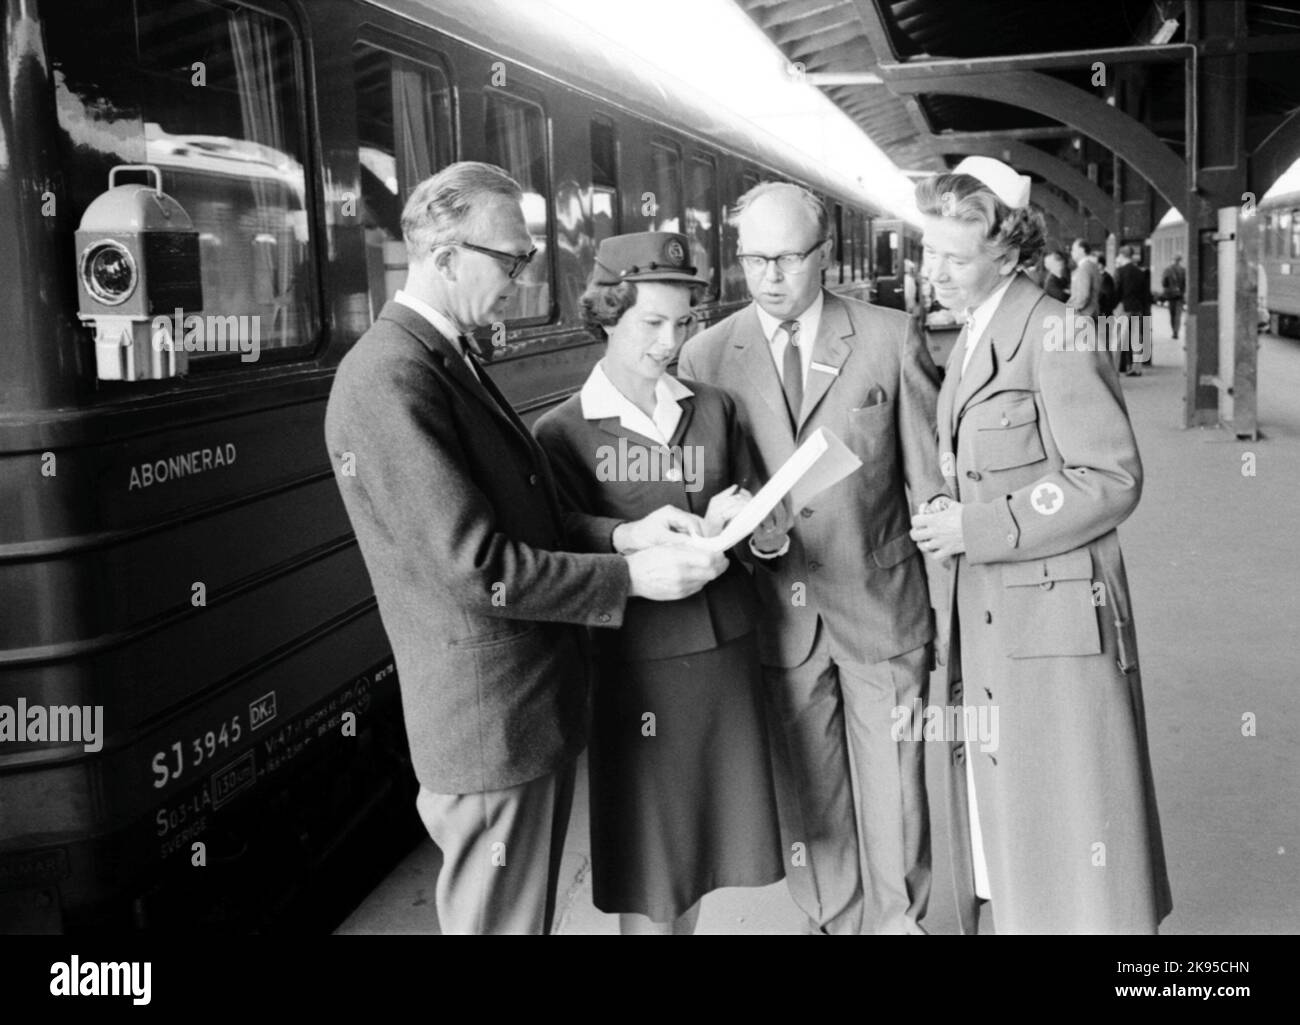 Departure of the first trip on the 'Sunlit Nights Land Cruises' (SNLC) (Dollaråget) from Central Station. Conscarriage State Railways SJ S0 3945. Two officials, a train hostess and a nurse, have a review before departure. Stock Photo